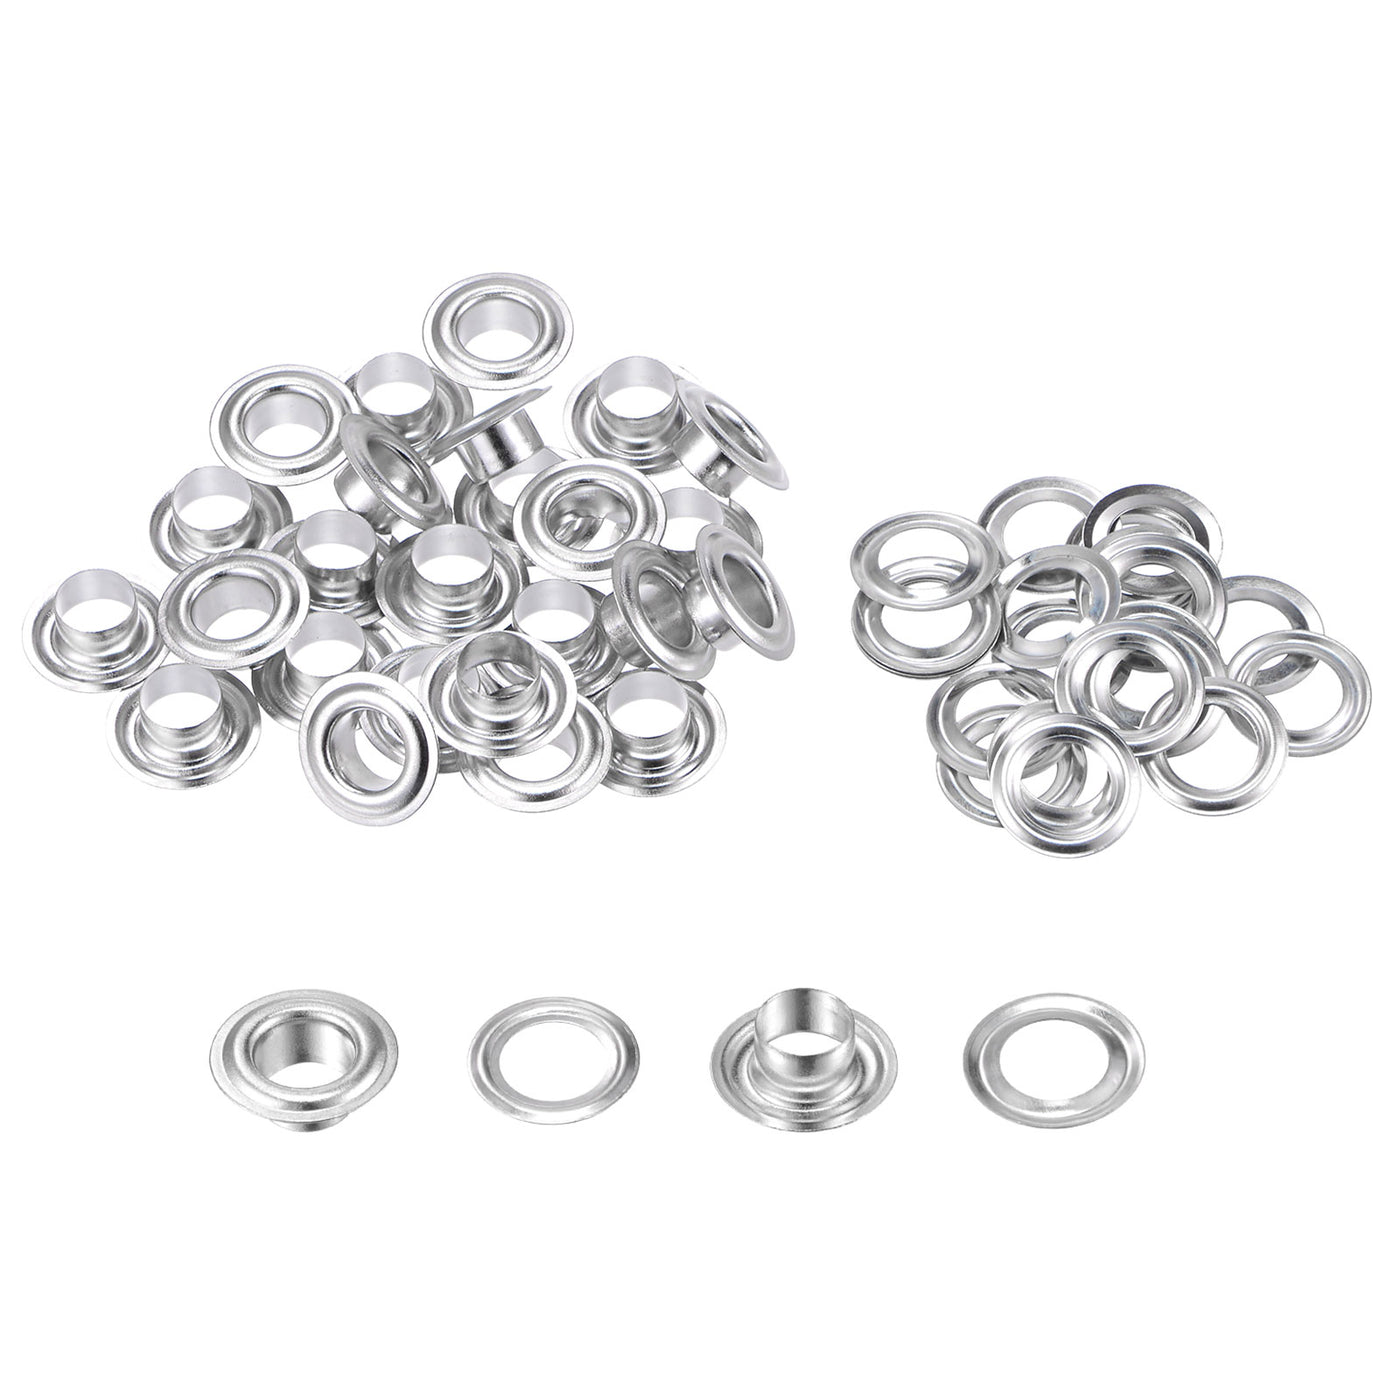 uxcell Uxcell 25Set 7.5mm Hole Copper Grommets Eyelets Silver Tone for Fabric Leather